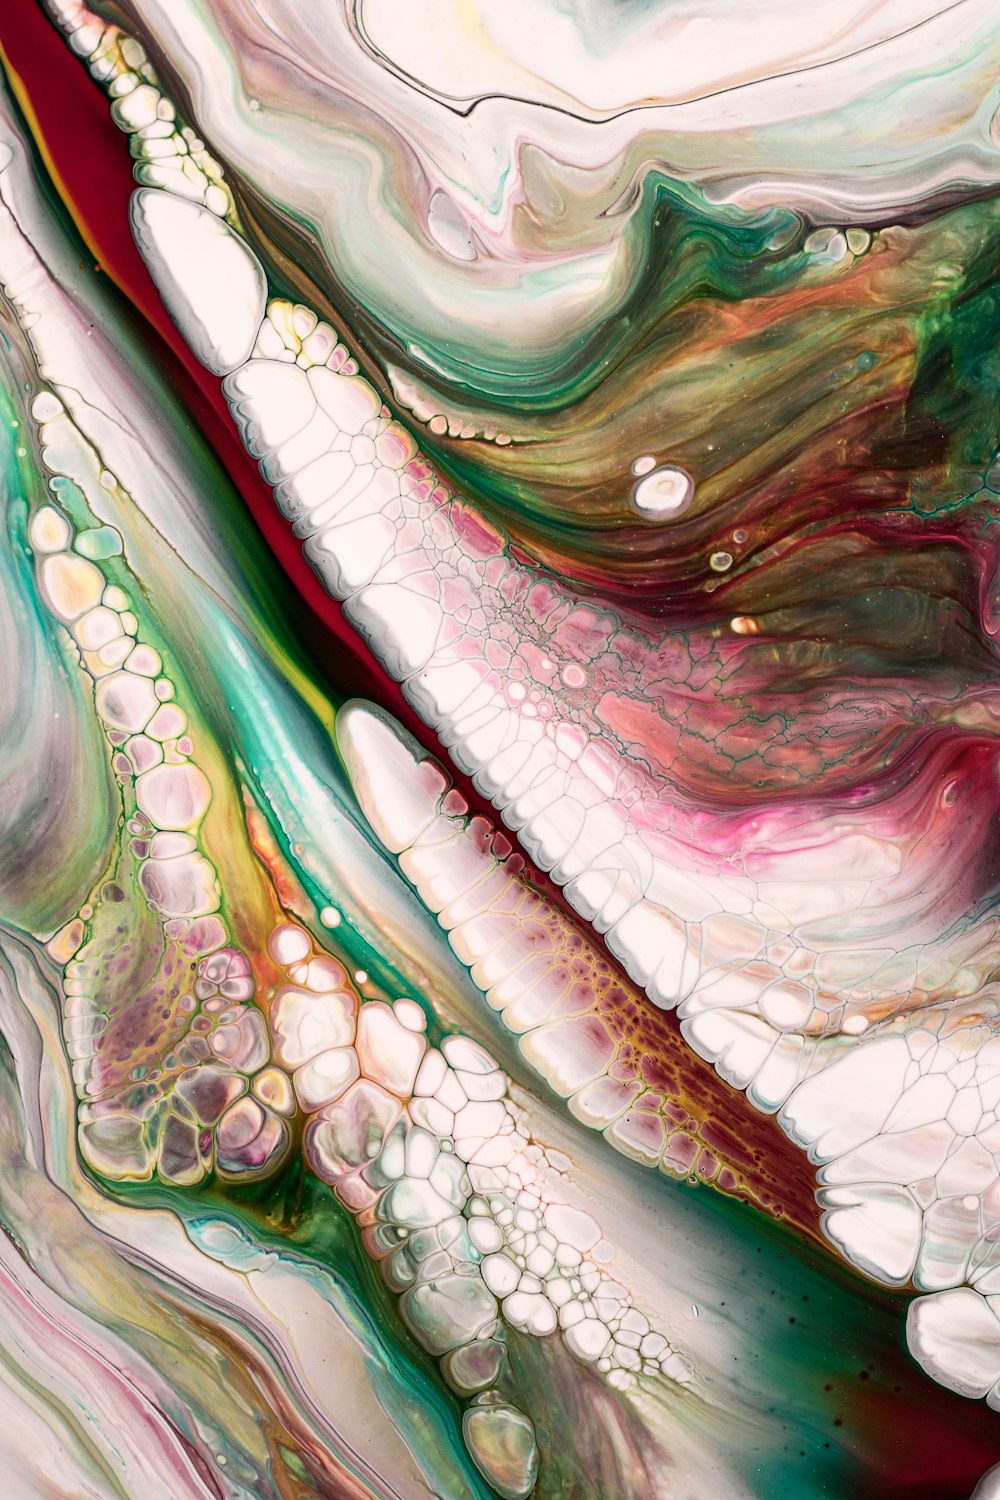 a close up of an abstract painting with red, green, and white colors